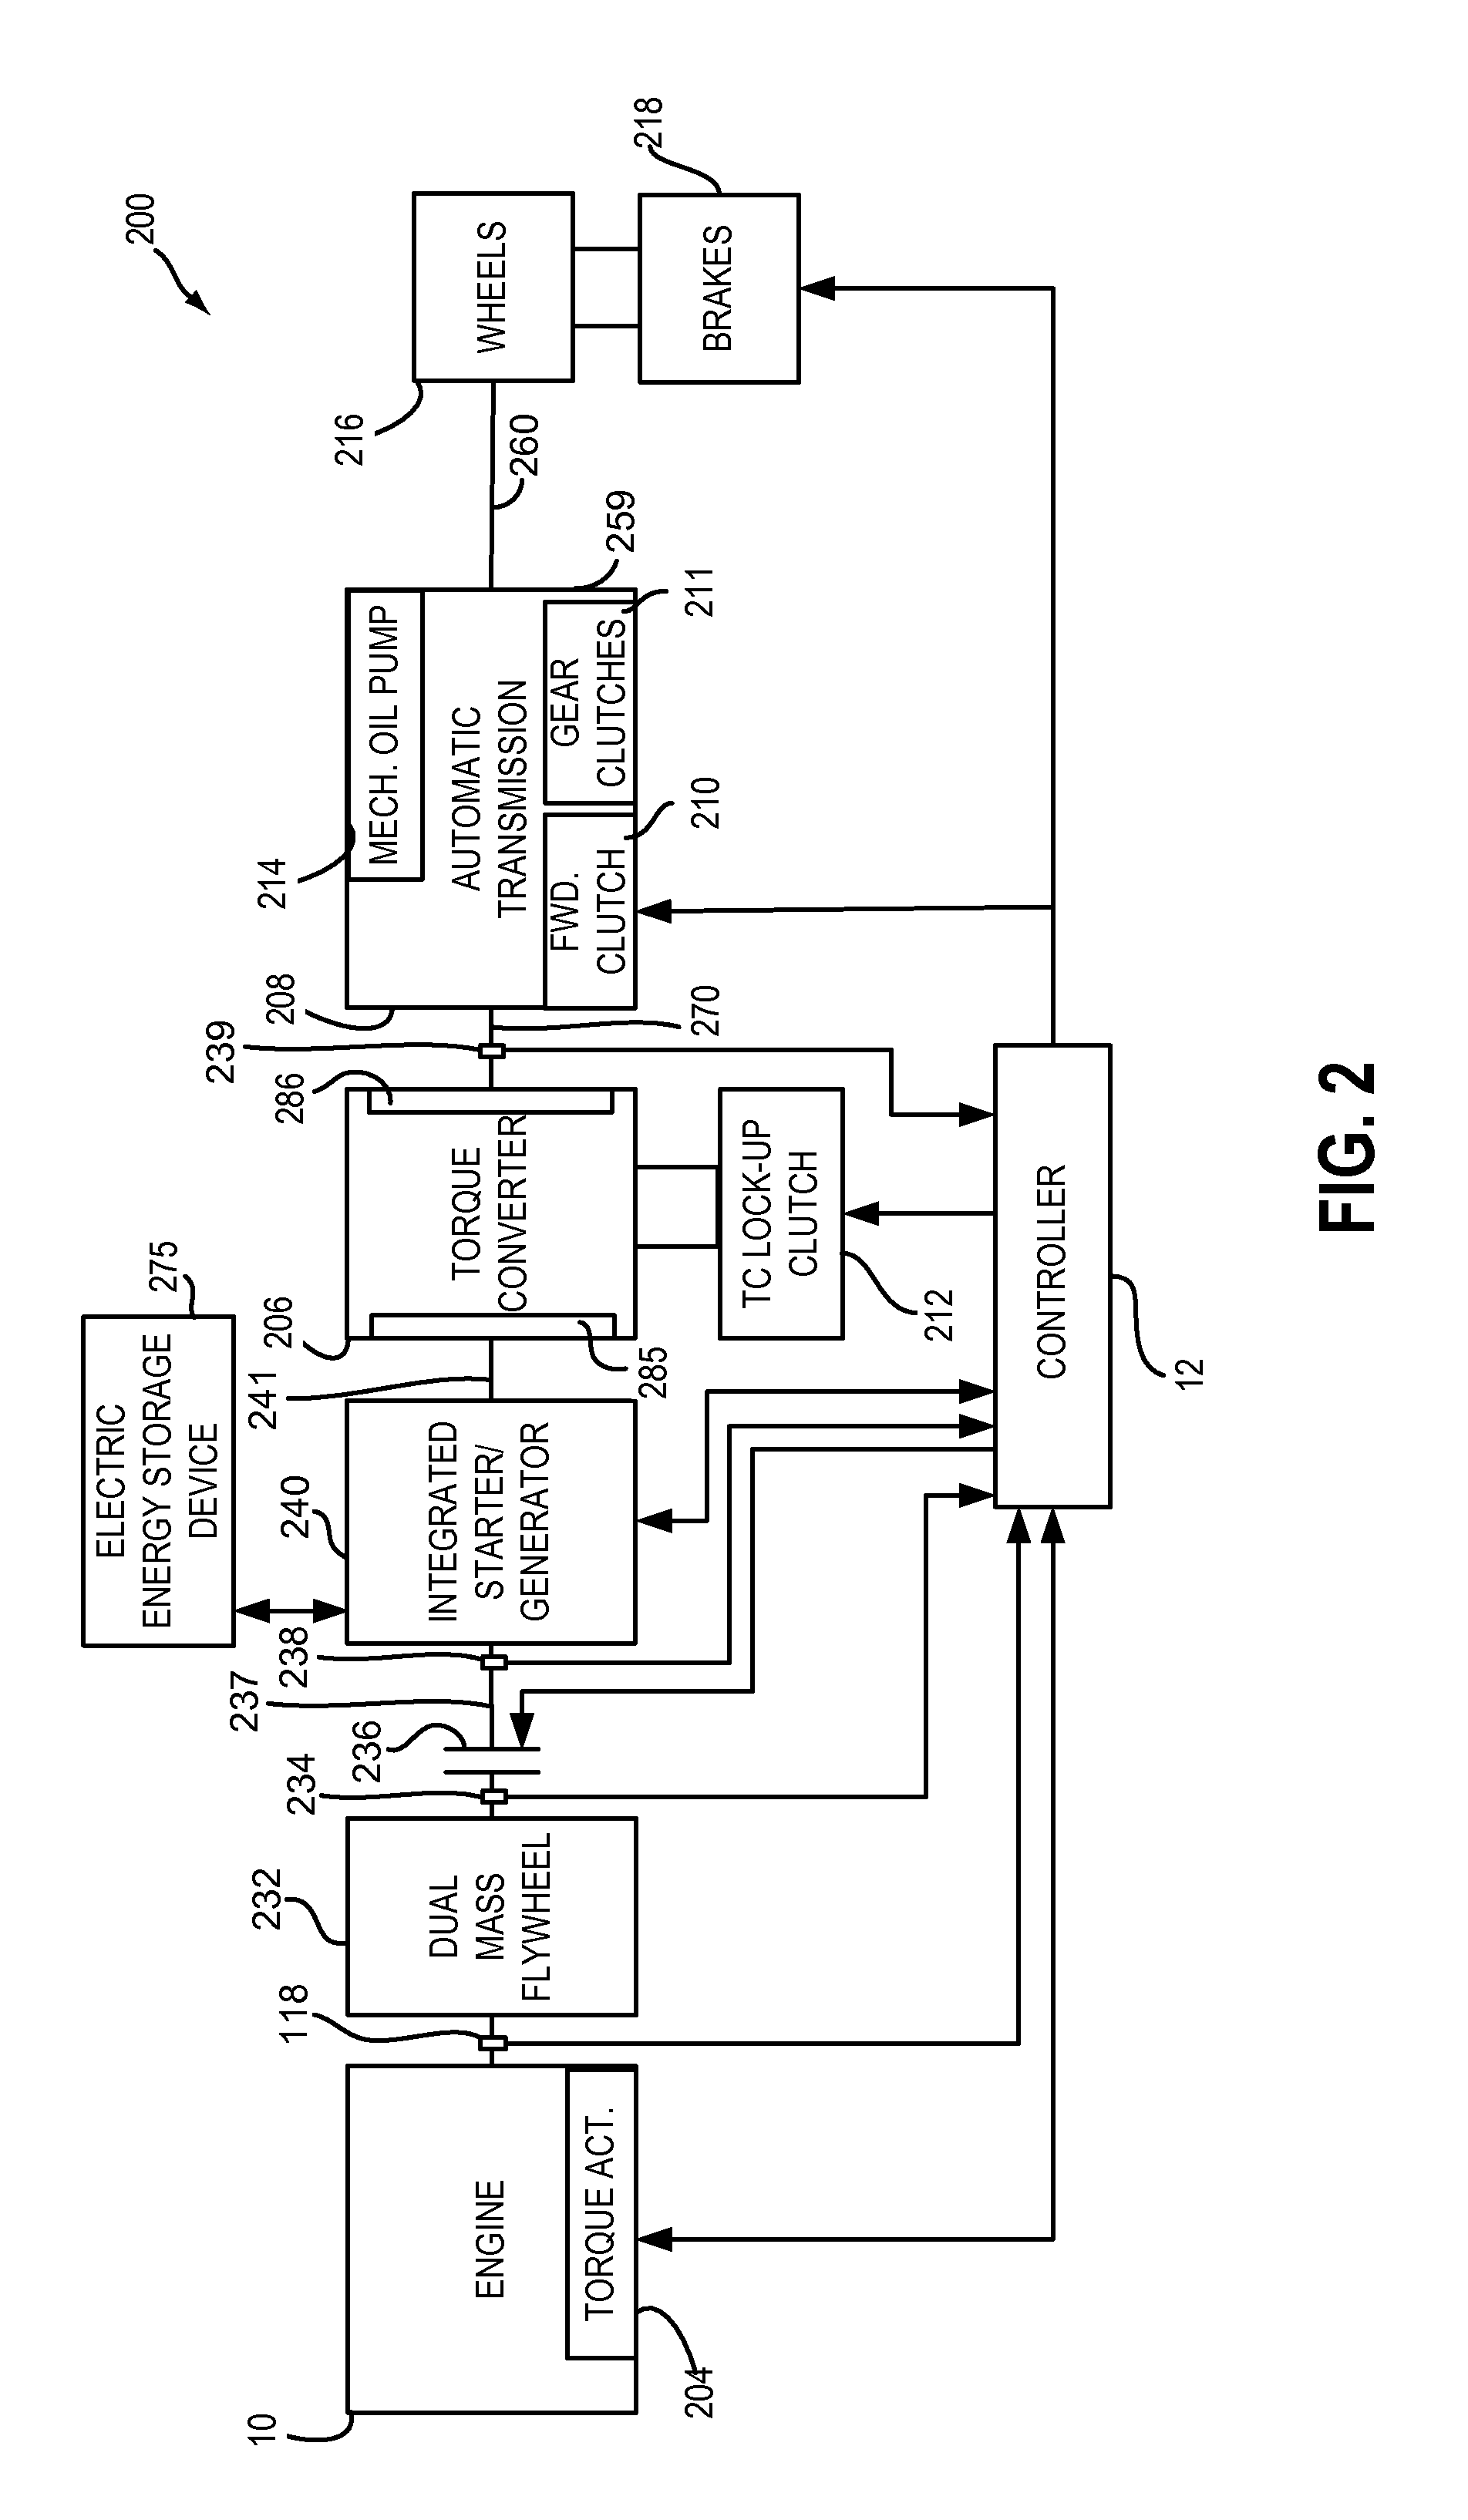 Methods and systems for a hybrid vehicle